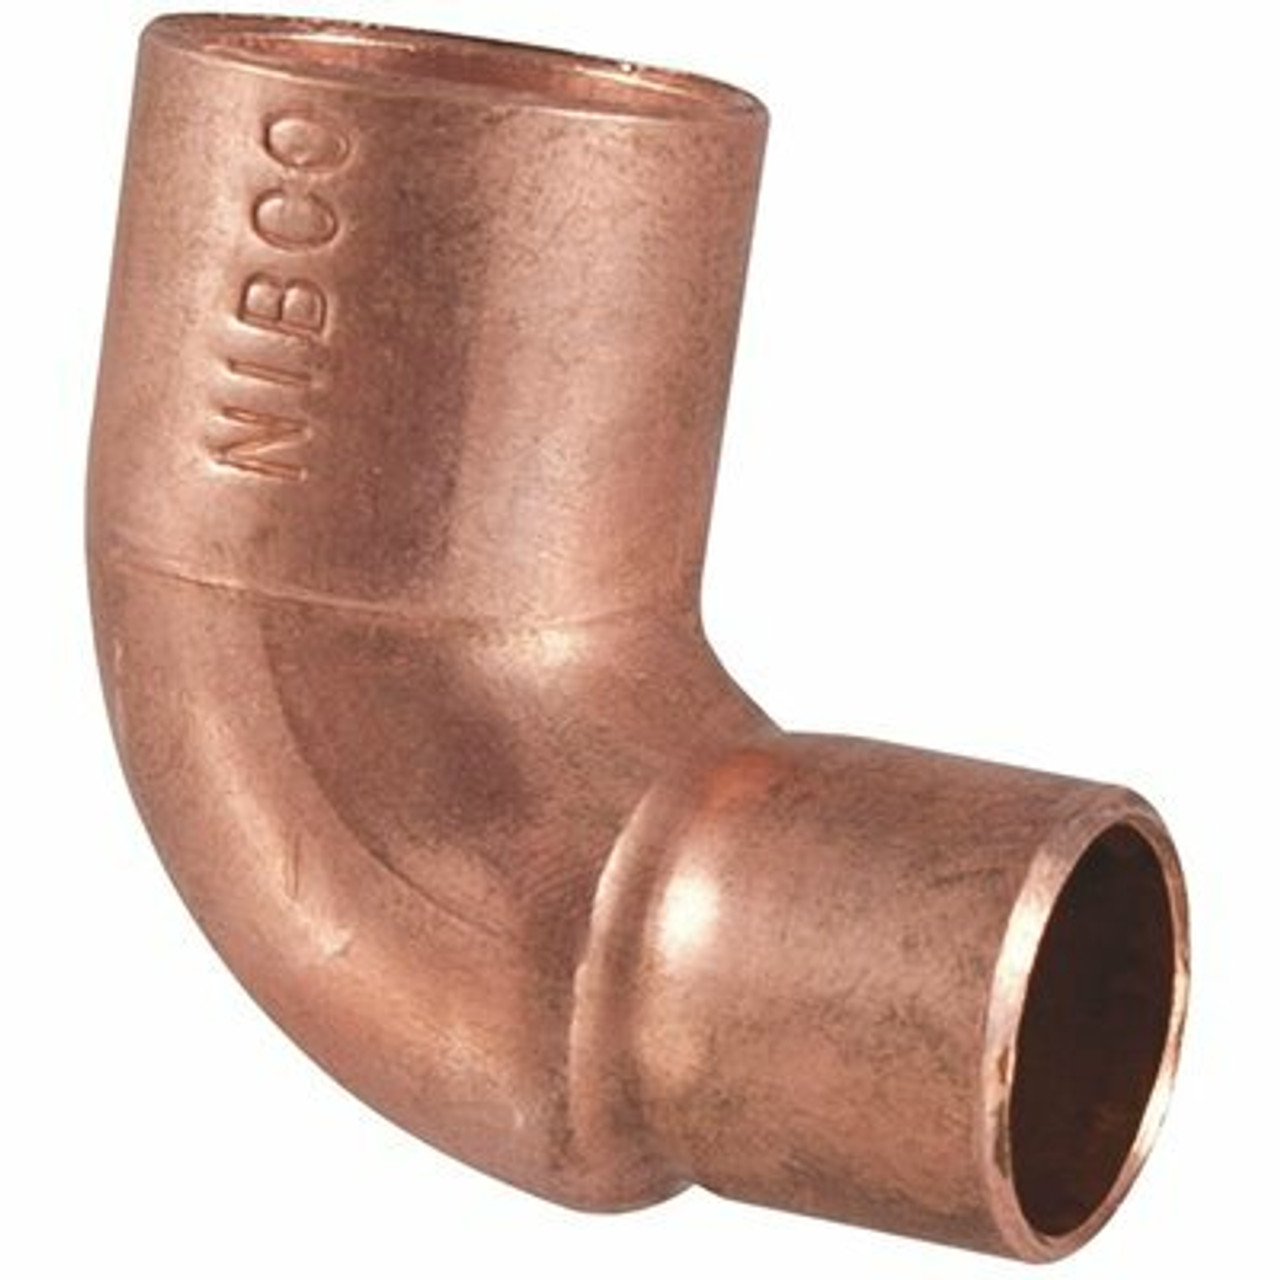 Everbilt 1 In. X 3/4 In. Copper Pressure 90-Degree Cup X Cup Reducing Elbow